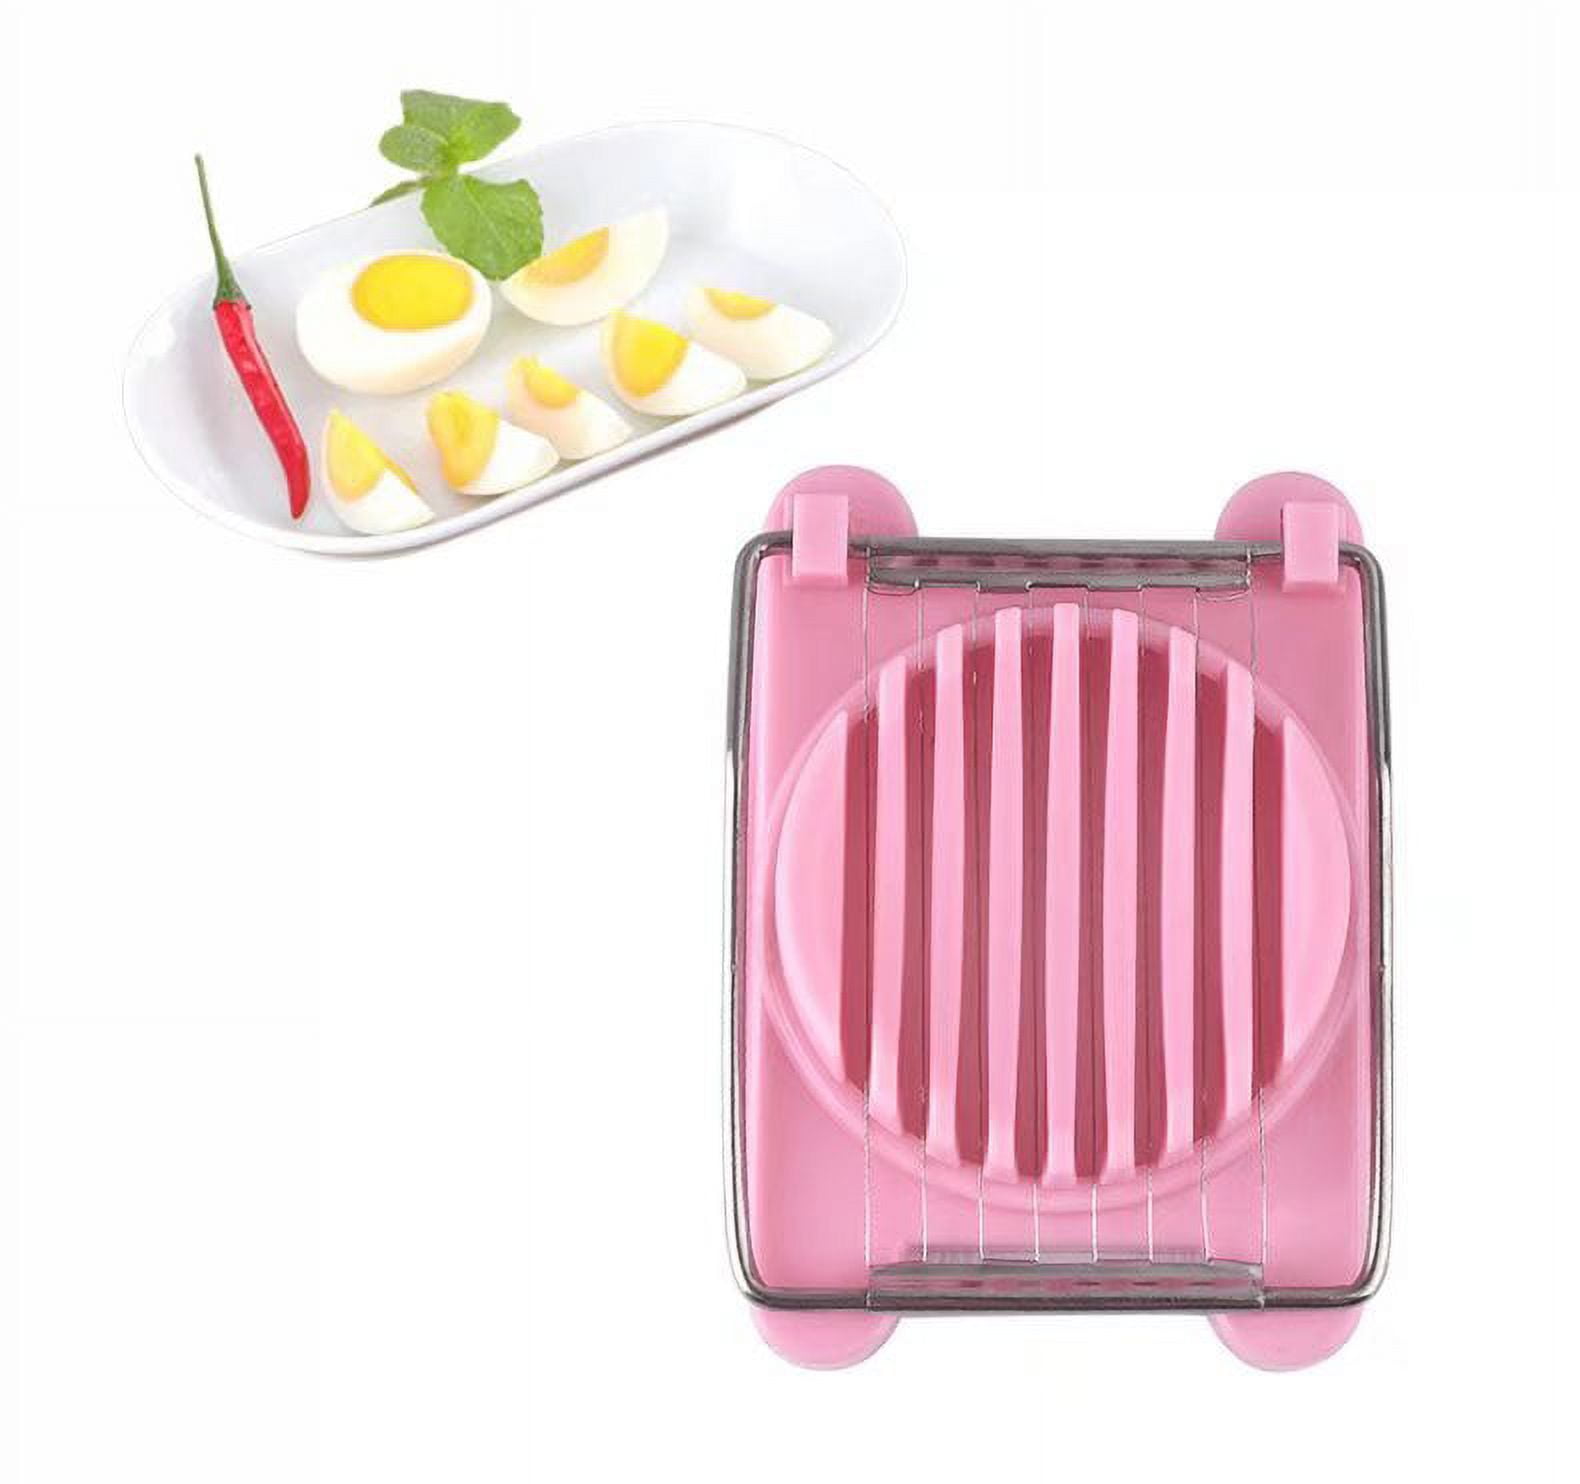  BORDSTRACT Egg Slicers, 2 In1 Multifunction Heavy Duty Boiled Egg  Slicer, Egg Slicer for Eggs Strawberry Avocado : Home & Kitchen